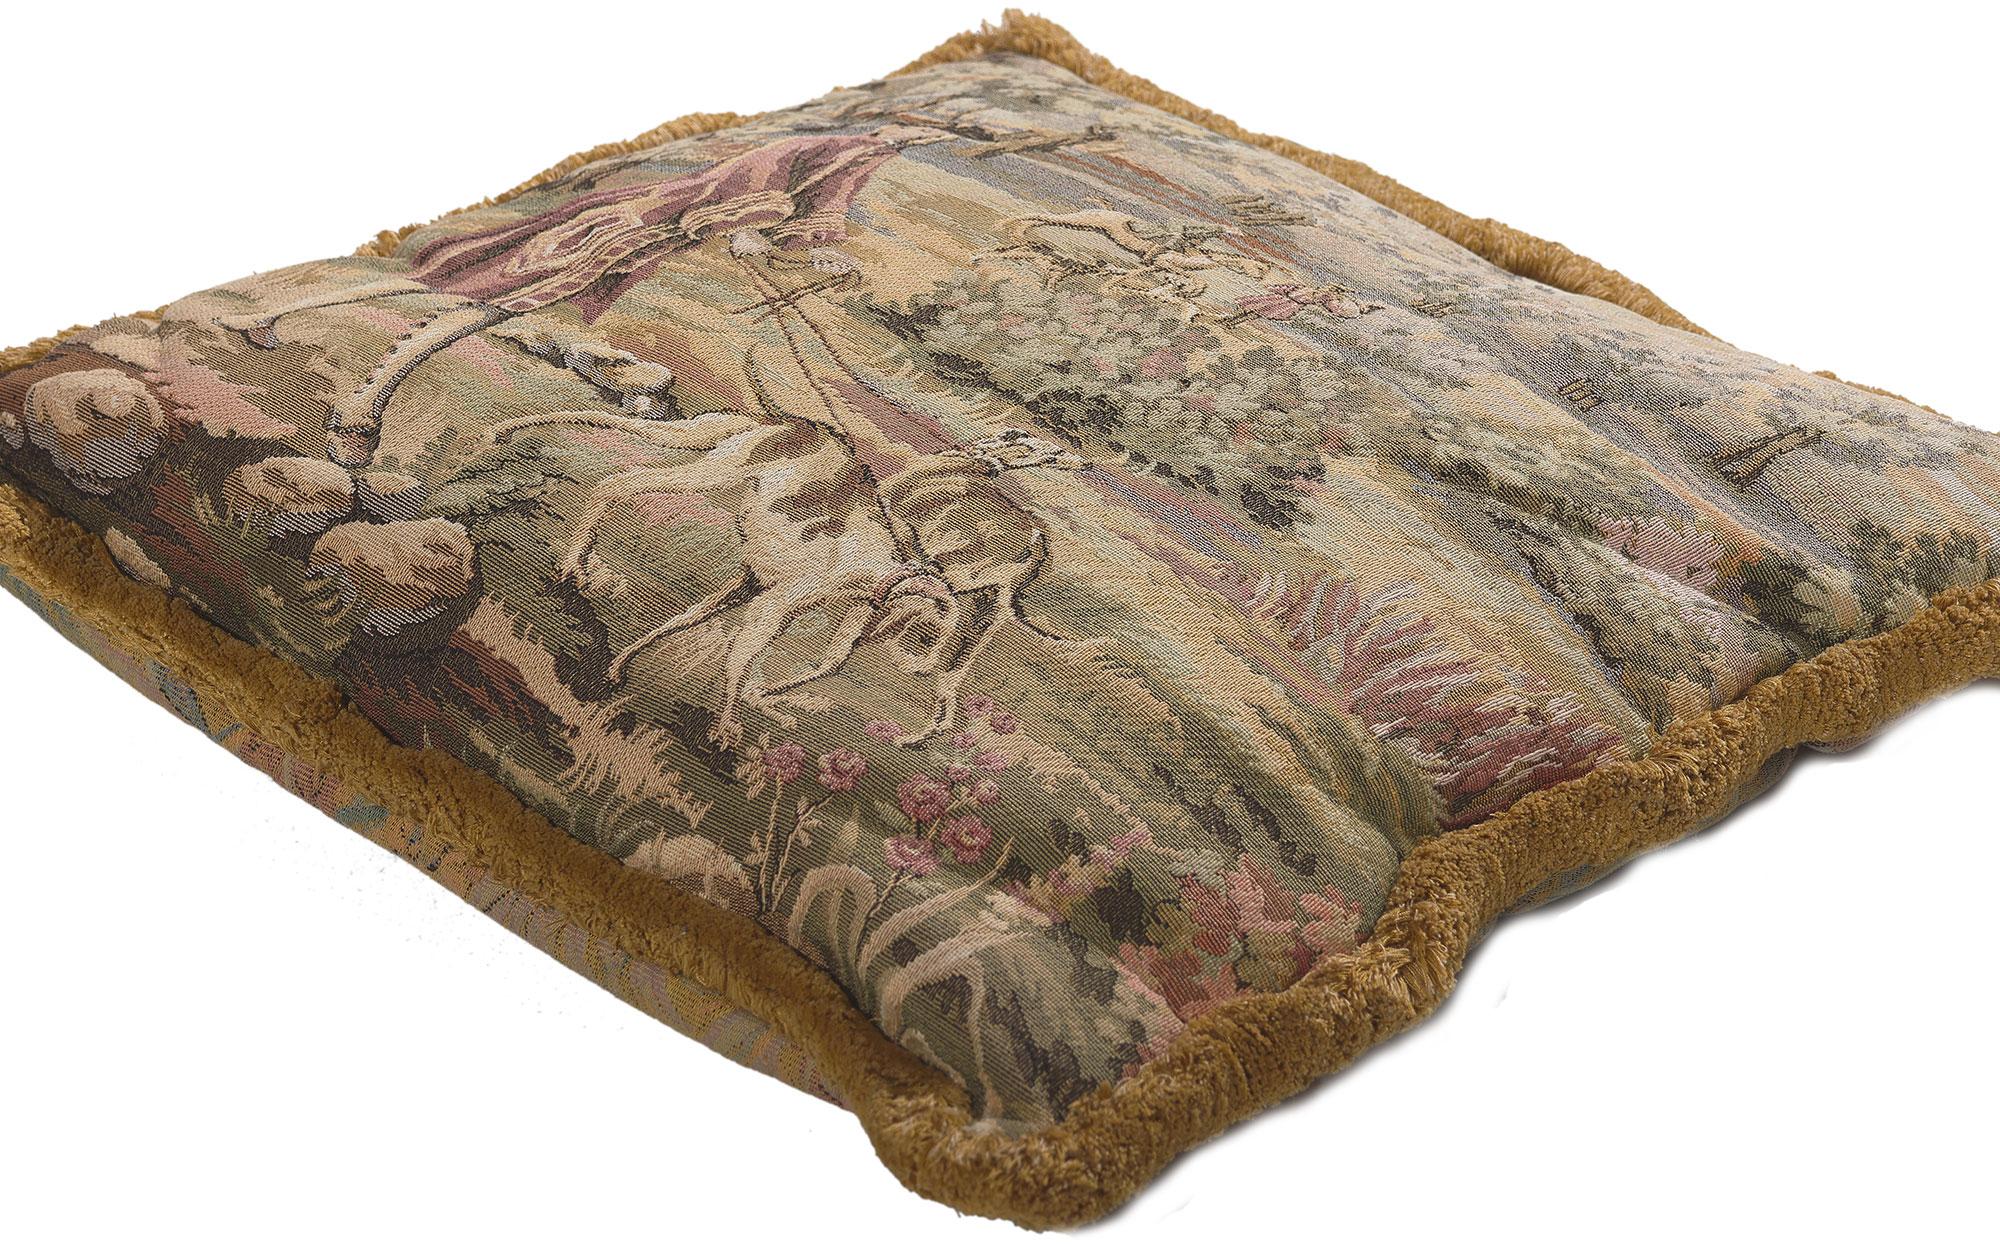 78620 Decorative Vintage Tapestry Pillow, 01'05 x 01'05. 
Emanating timeless style of Louis XV with incredible detail and texture, this decorative vintage tapestry pillow is a captivating vision of woven beauty. The Louis XV royal hunting scene and